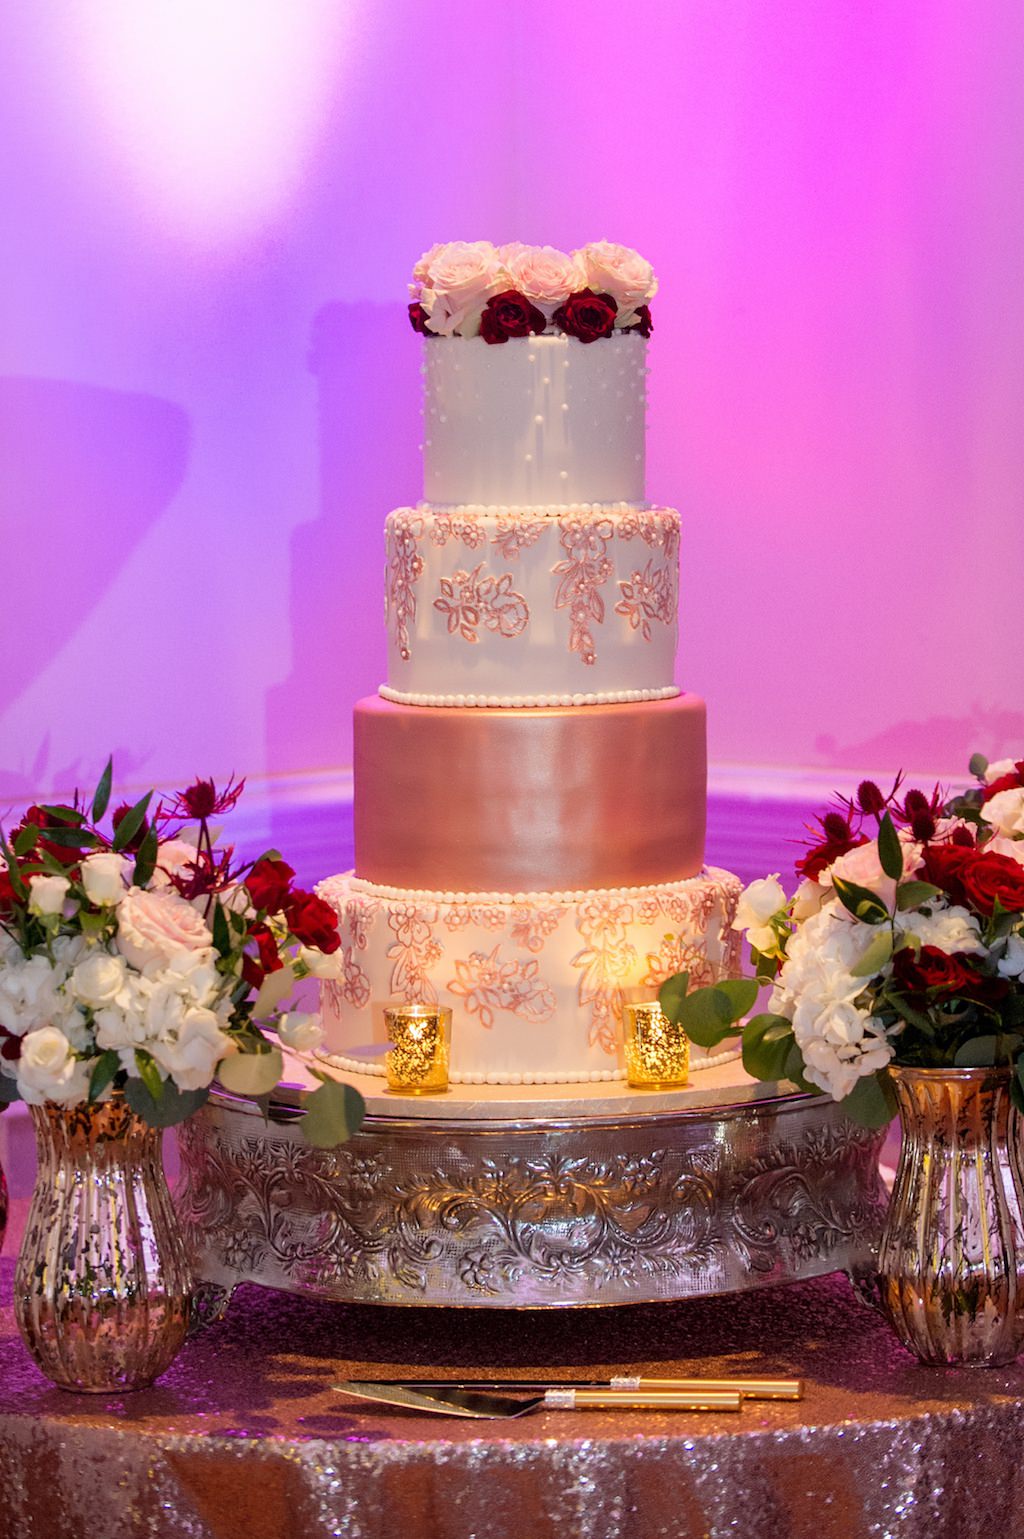 Four Tier Round White and Pink Wedding Cake with Rose Cake Topper on Silver Cake Stand, with Sequin Linen and Blush PInk, Burgundy, Red and Greenery Florals in Silver Vases